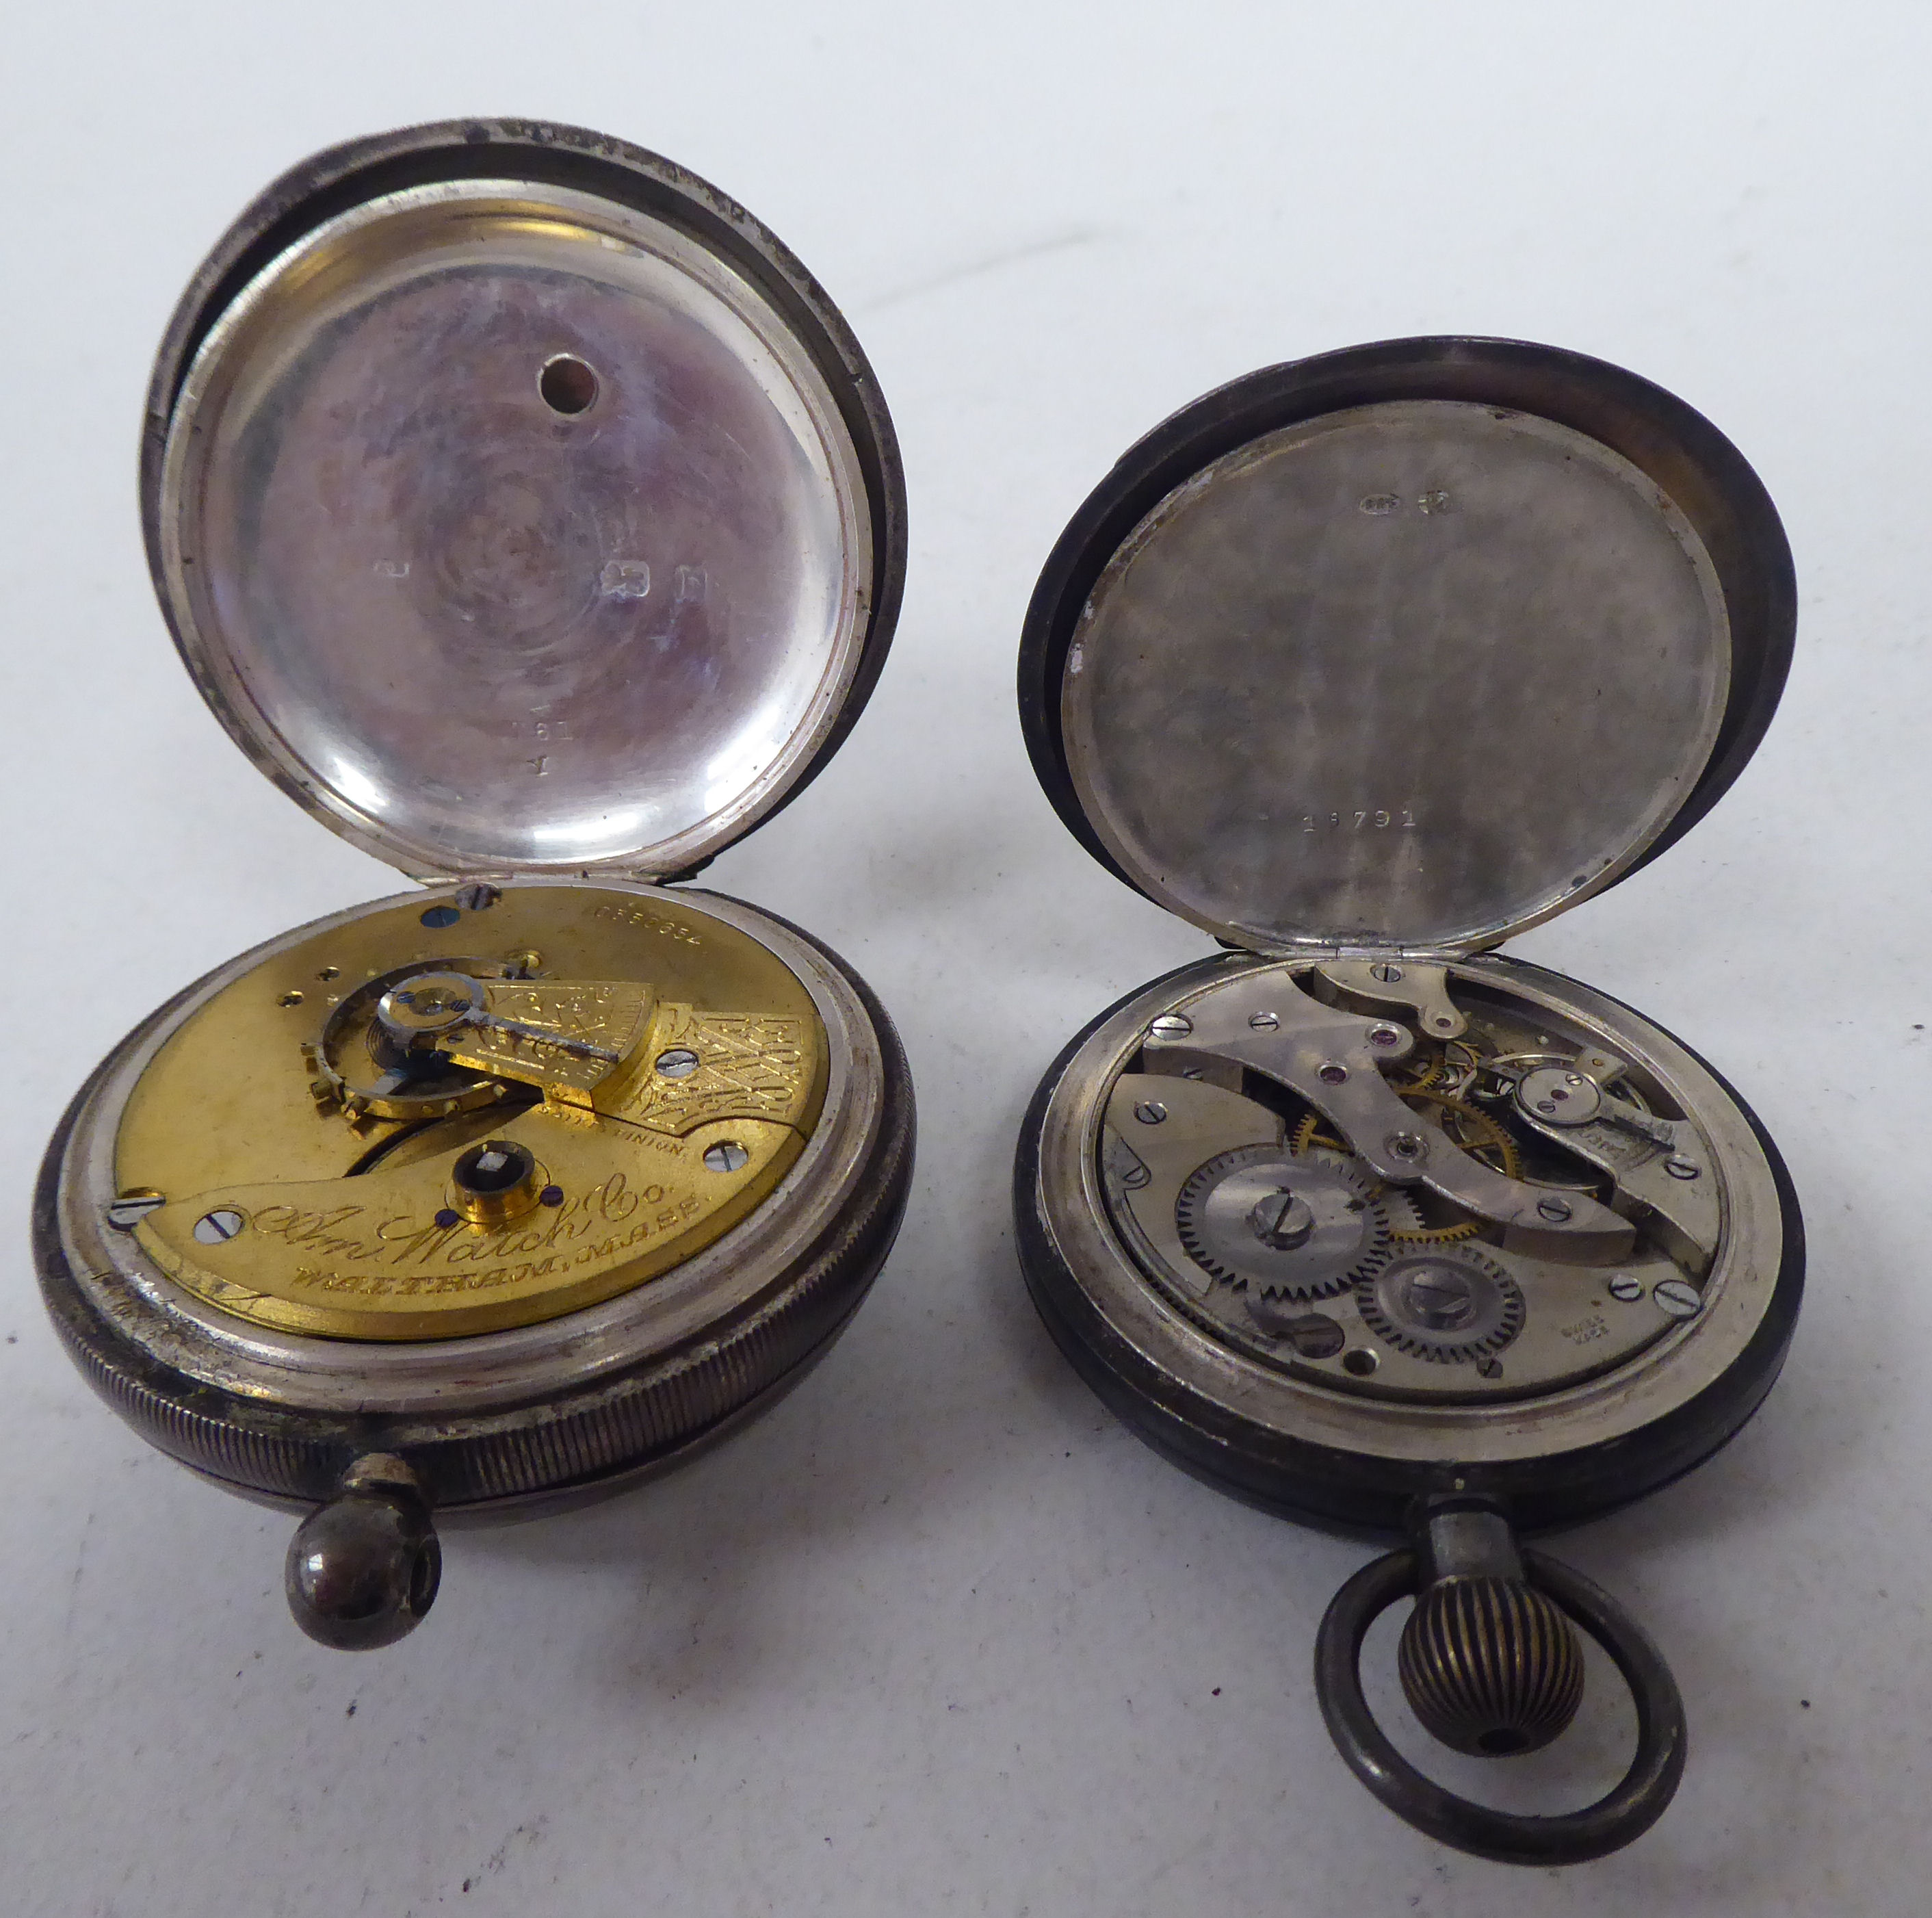 A Waltham silver cased pocketwatch, faced by a Roman dial; and another, faced by an Arabic dial - Image 5 of 6